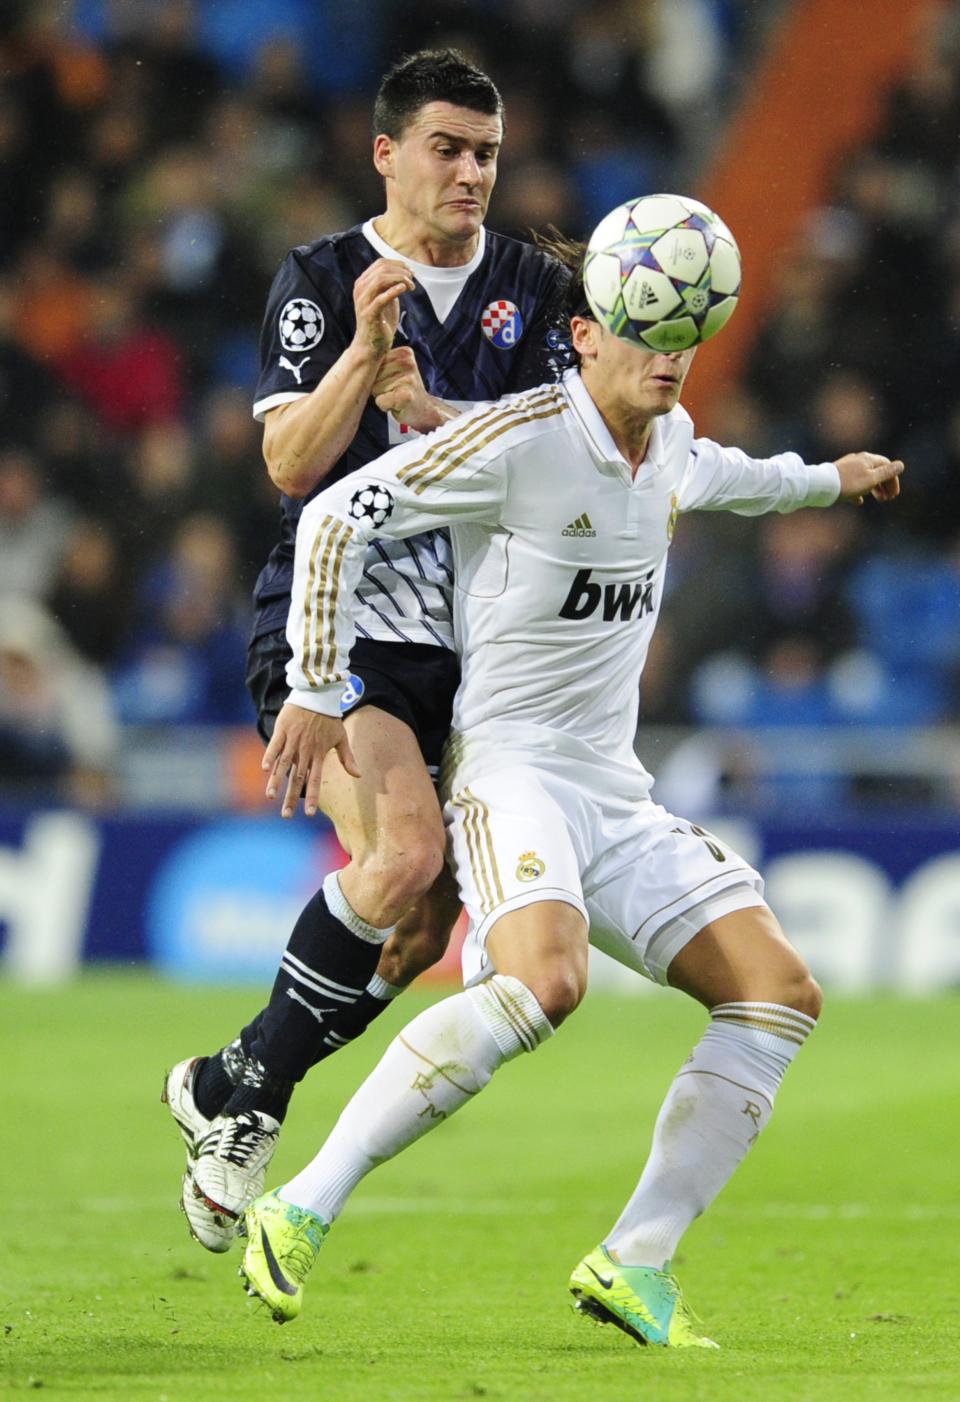 Real Madrid's German midfielder Mesut Ozil (R) vies with Dinamo Zagreb's Bosnian midfielder Mehmed Alispahic (L) during the Champions League group D football match between Real Madrid and Dinamo Zagreb at the Santiago Bernabeu stadium in Madrid on November 22, 2011. AFP PHOTO/JAVIER SORIANO (Photo credit should read JAVIER SORIANO/AFP/Getty Images)